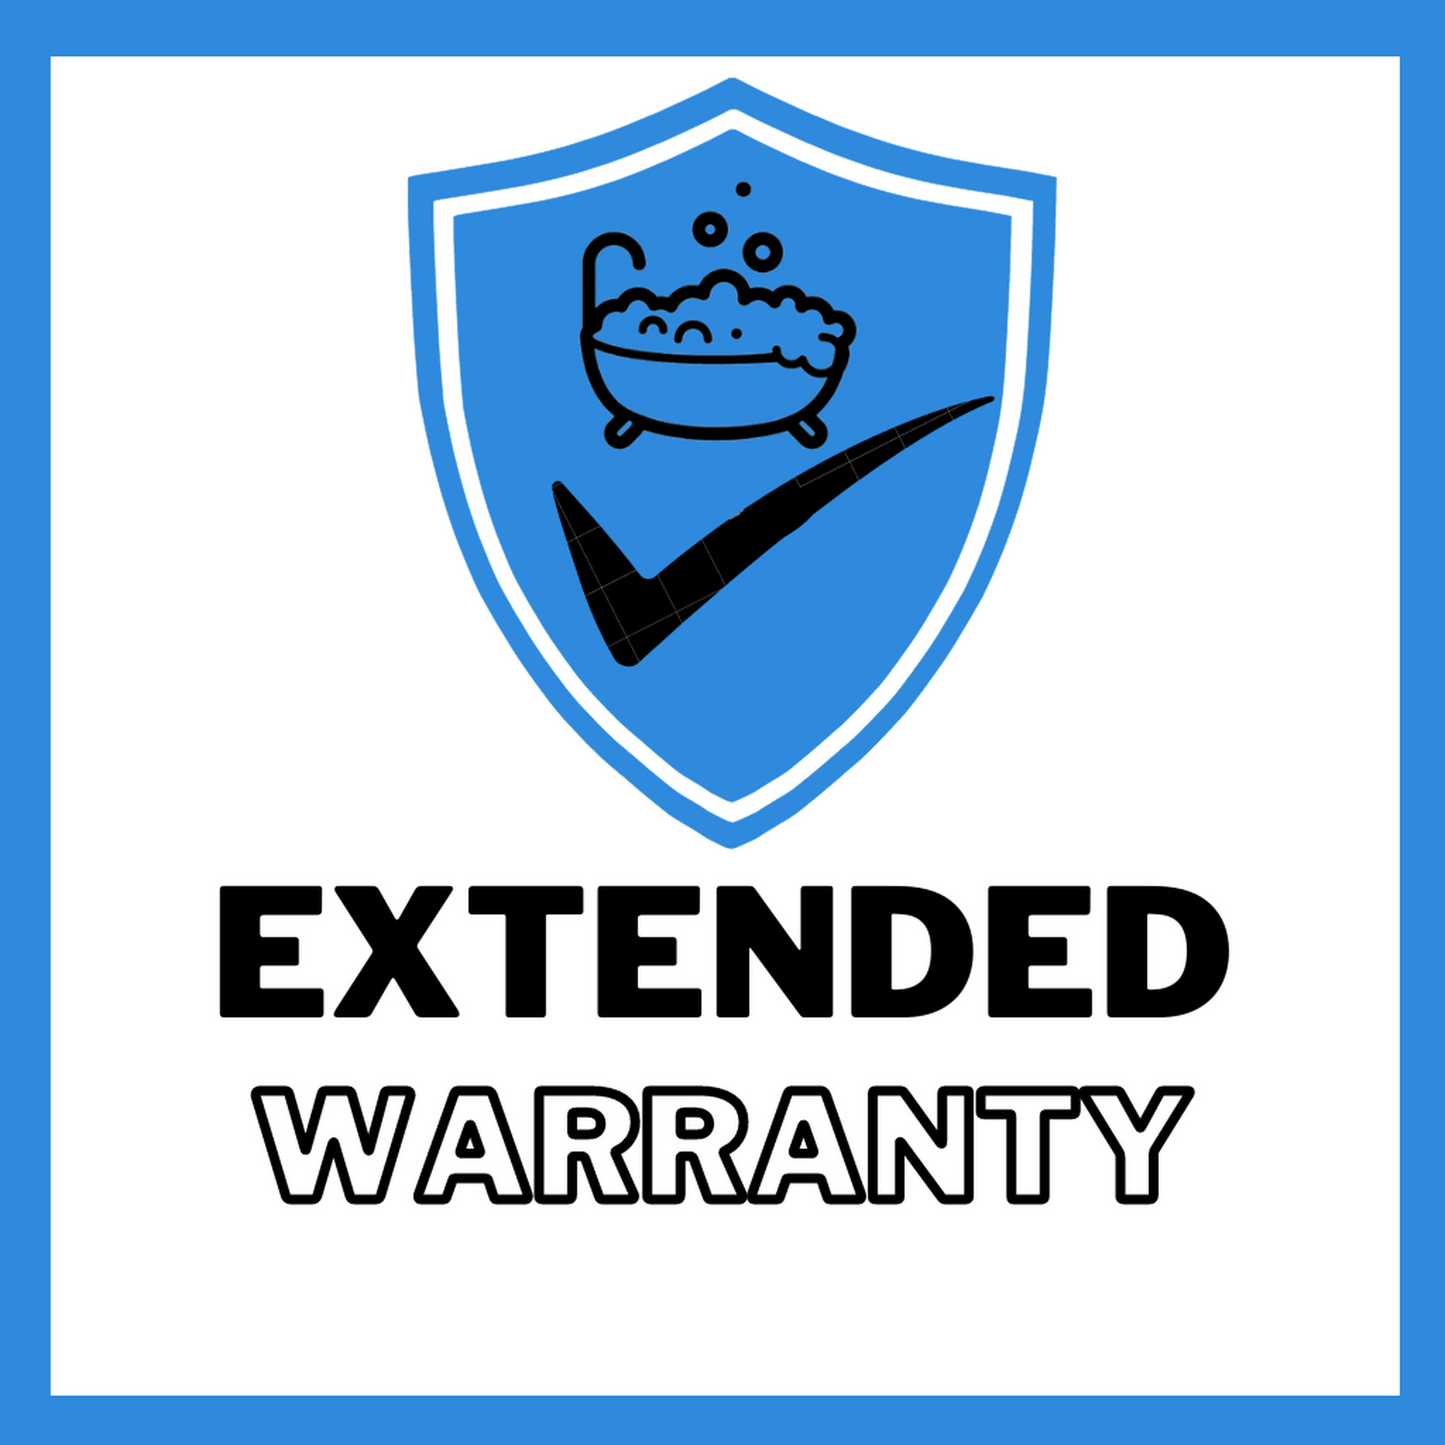 Extended Warranty [applies to products under $25000]